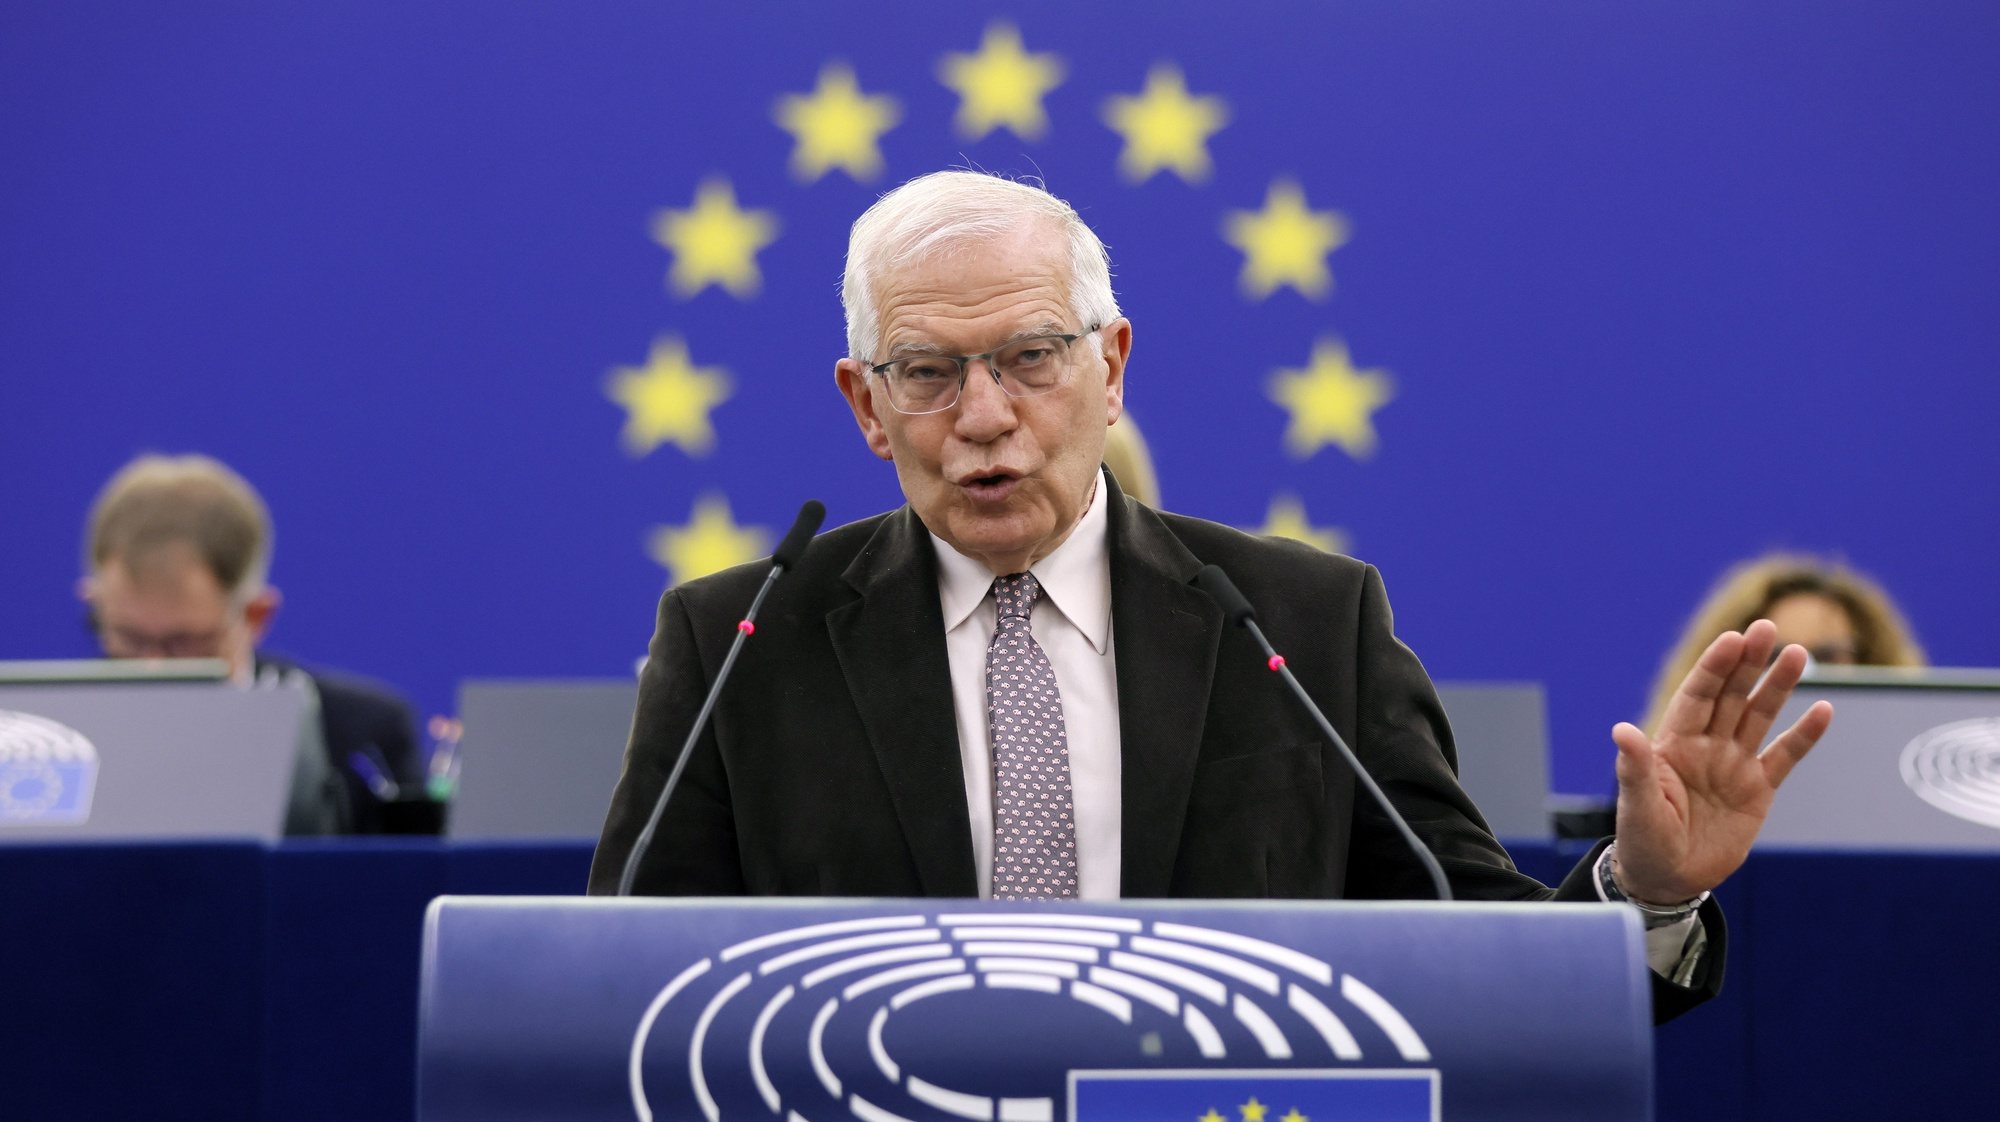 epa09873200 European Union foreign policy chief Josep Borrell delivers a speech during a debate at the European Parliament in Strasbourg, France, 06 April 2022. The European Parliament on 06 April will review the results of the European Council held on 24 and 25 March, focusing on the latest developments of the war in Ukraine and the EU sanctions against Russia.  EPA/RONALD WITTEK